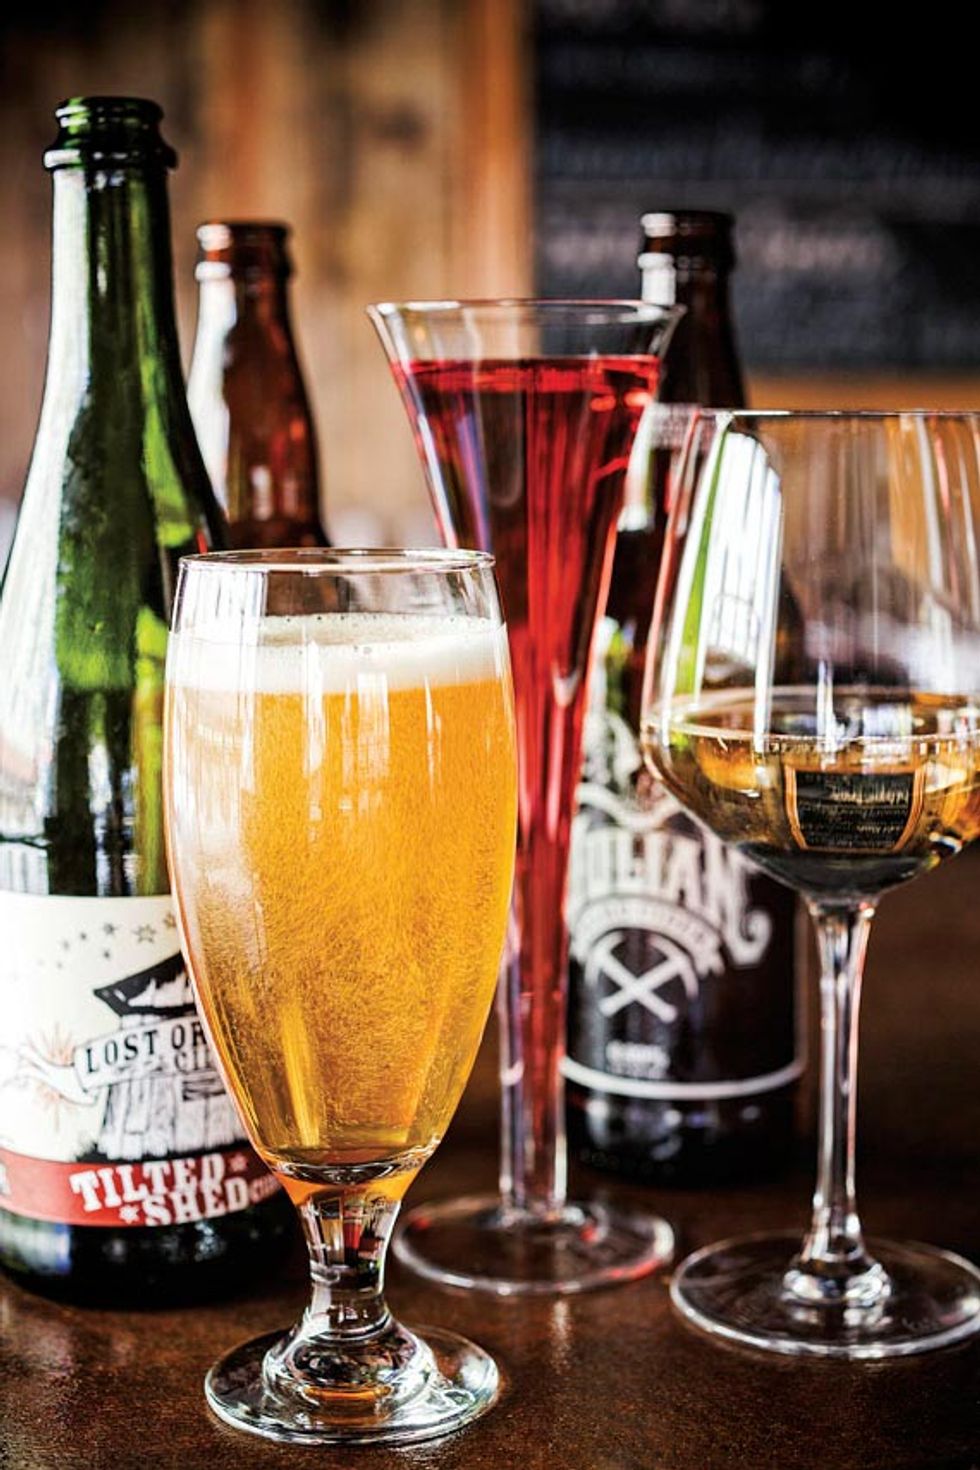 It's Official: Cider is Trending